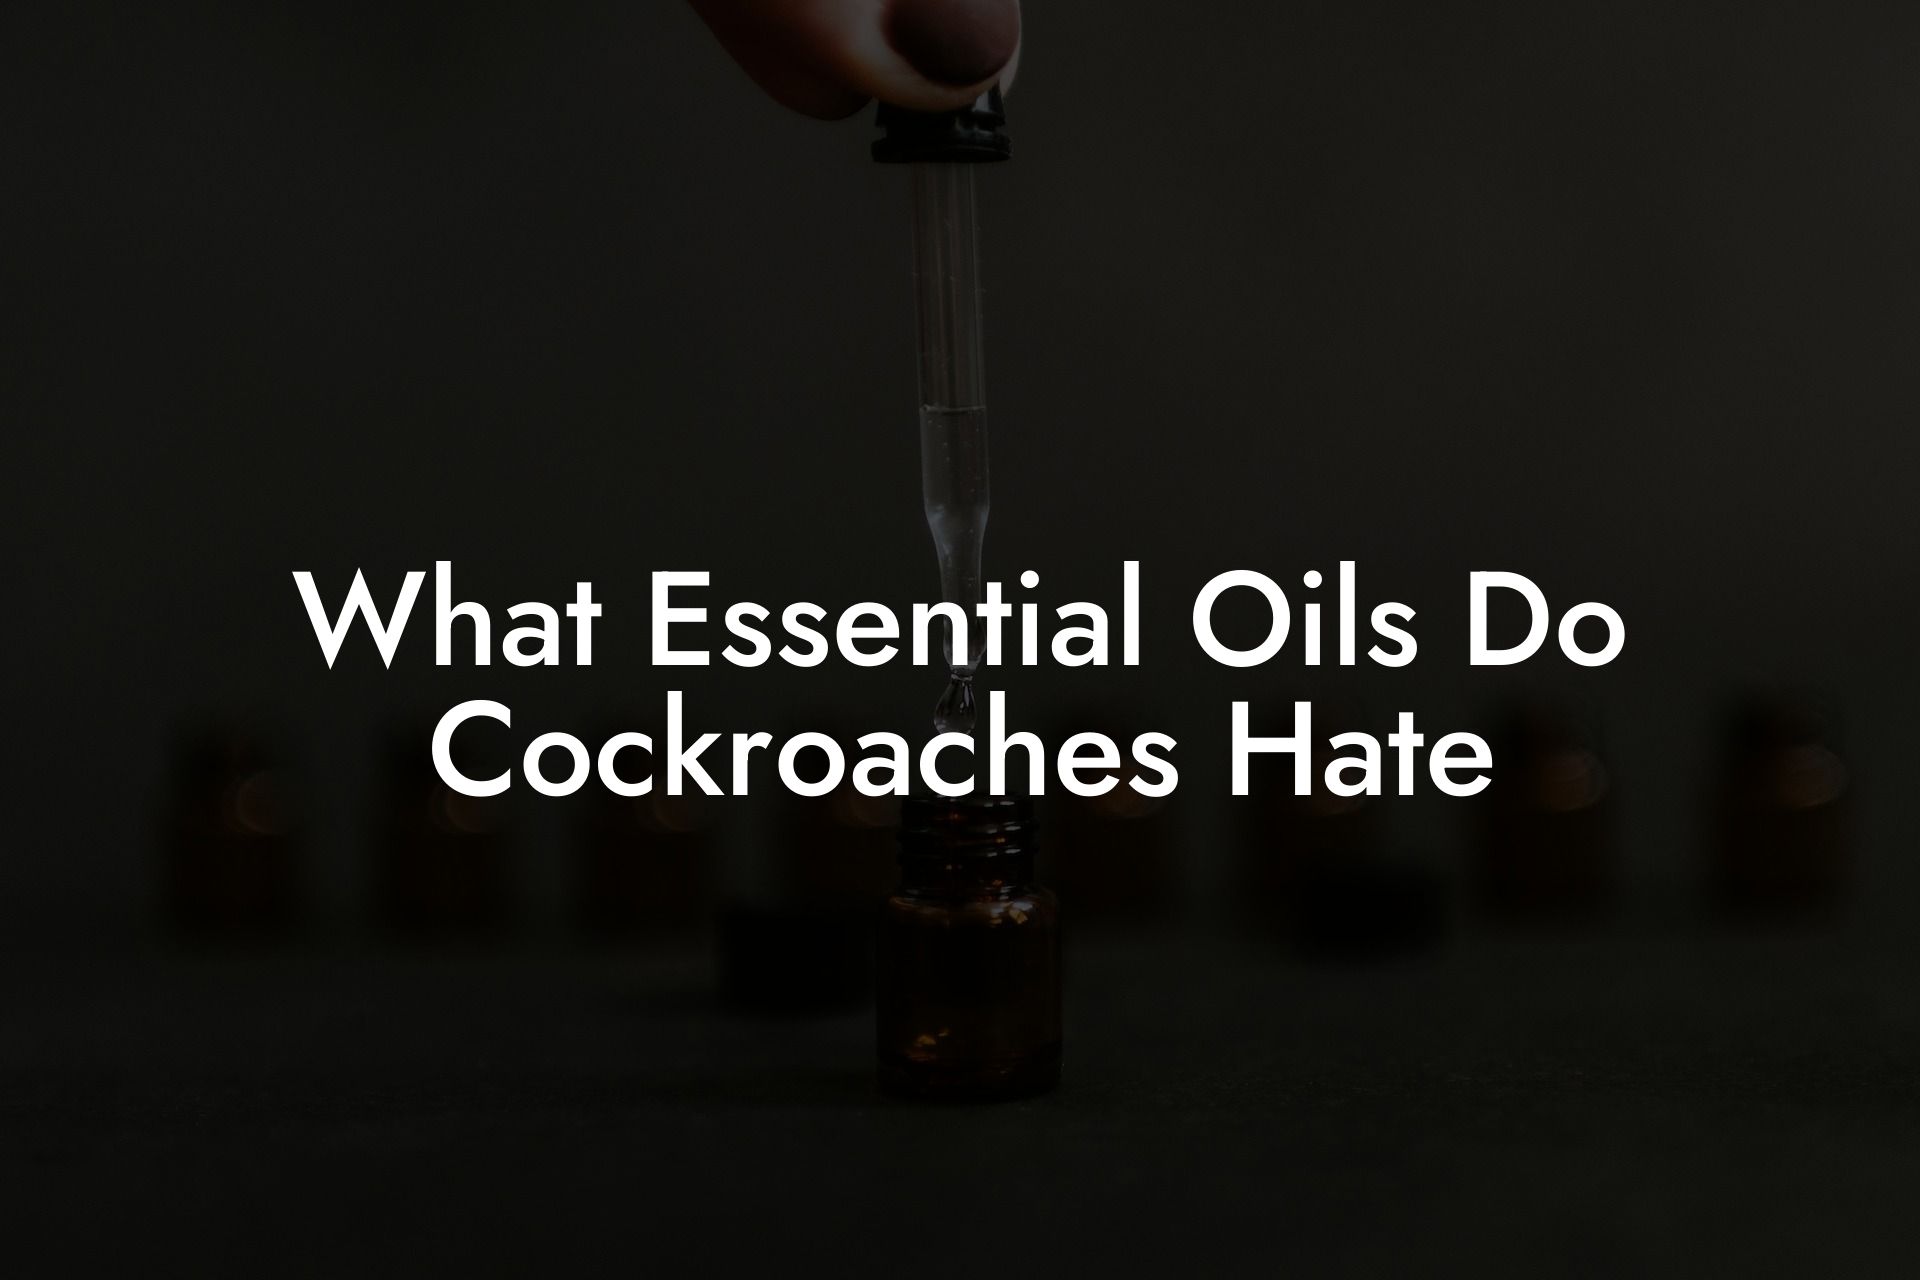 What Essential Oils Do Cockroaches Hate